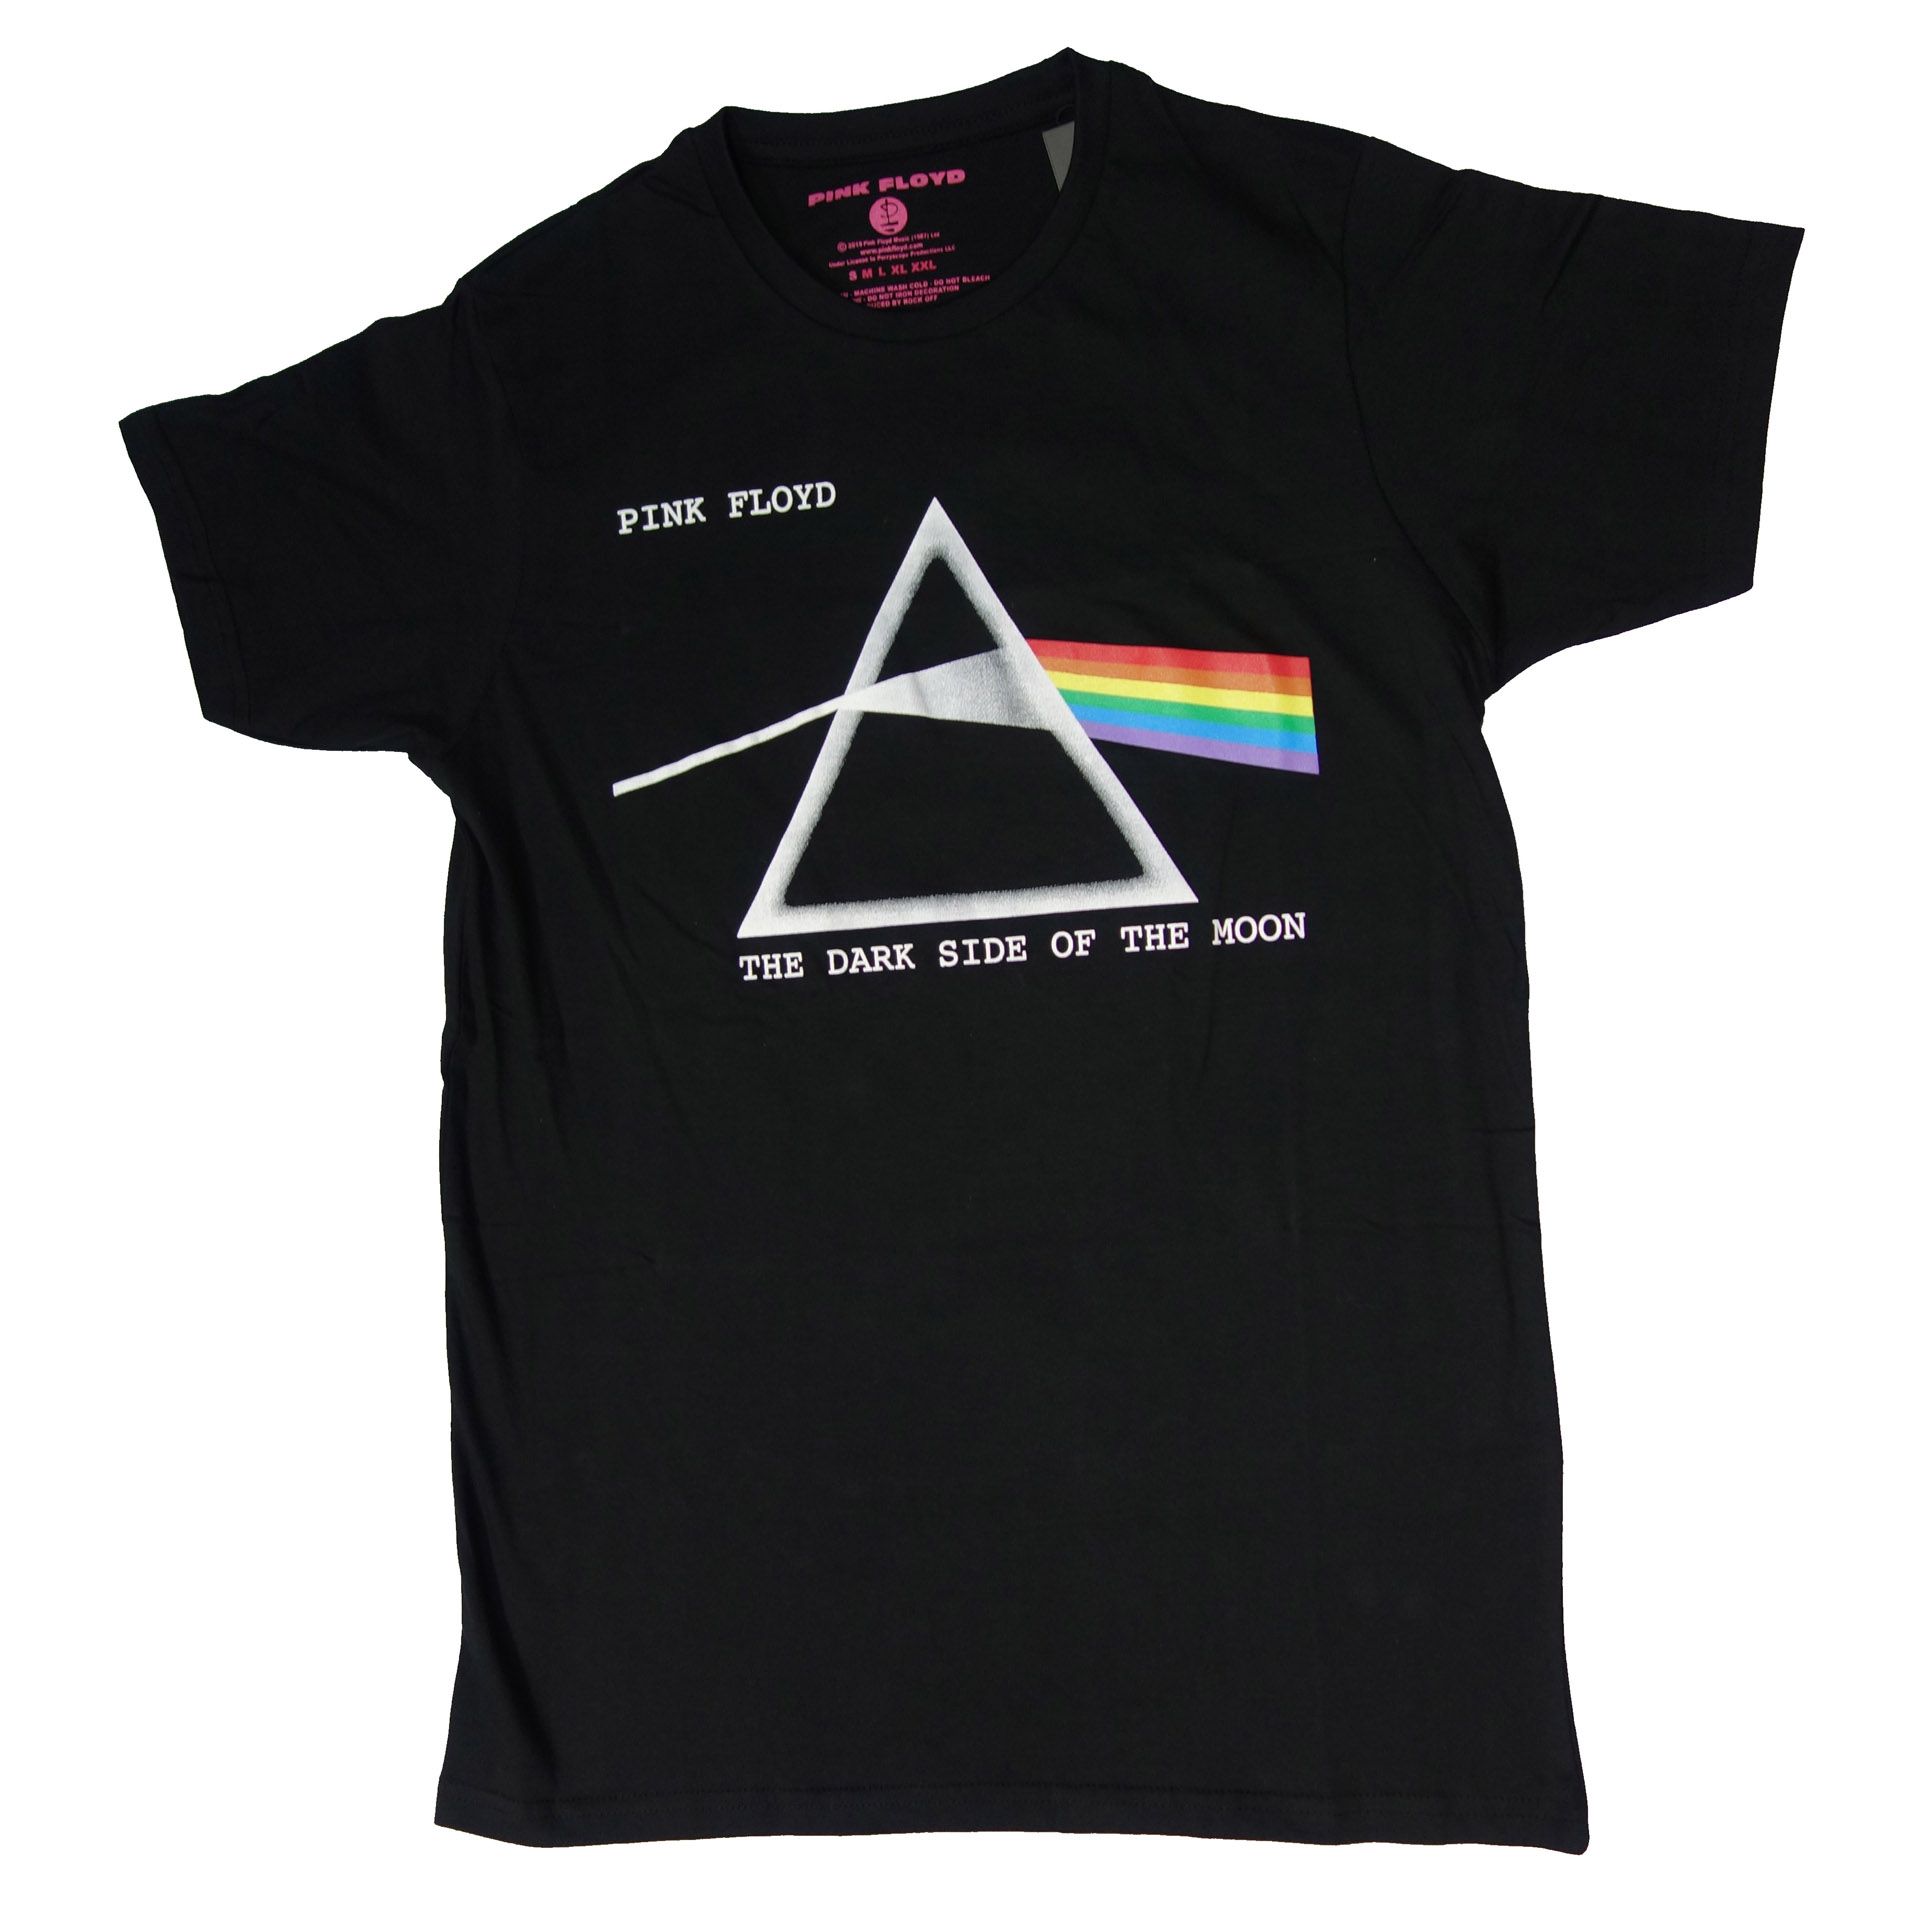 T-Shirt Pink Floyd The dark side of the Moon